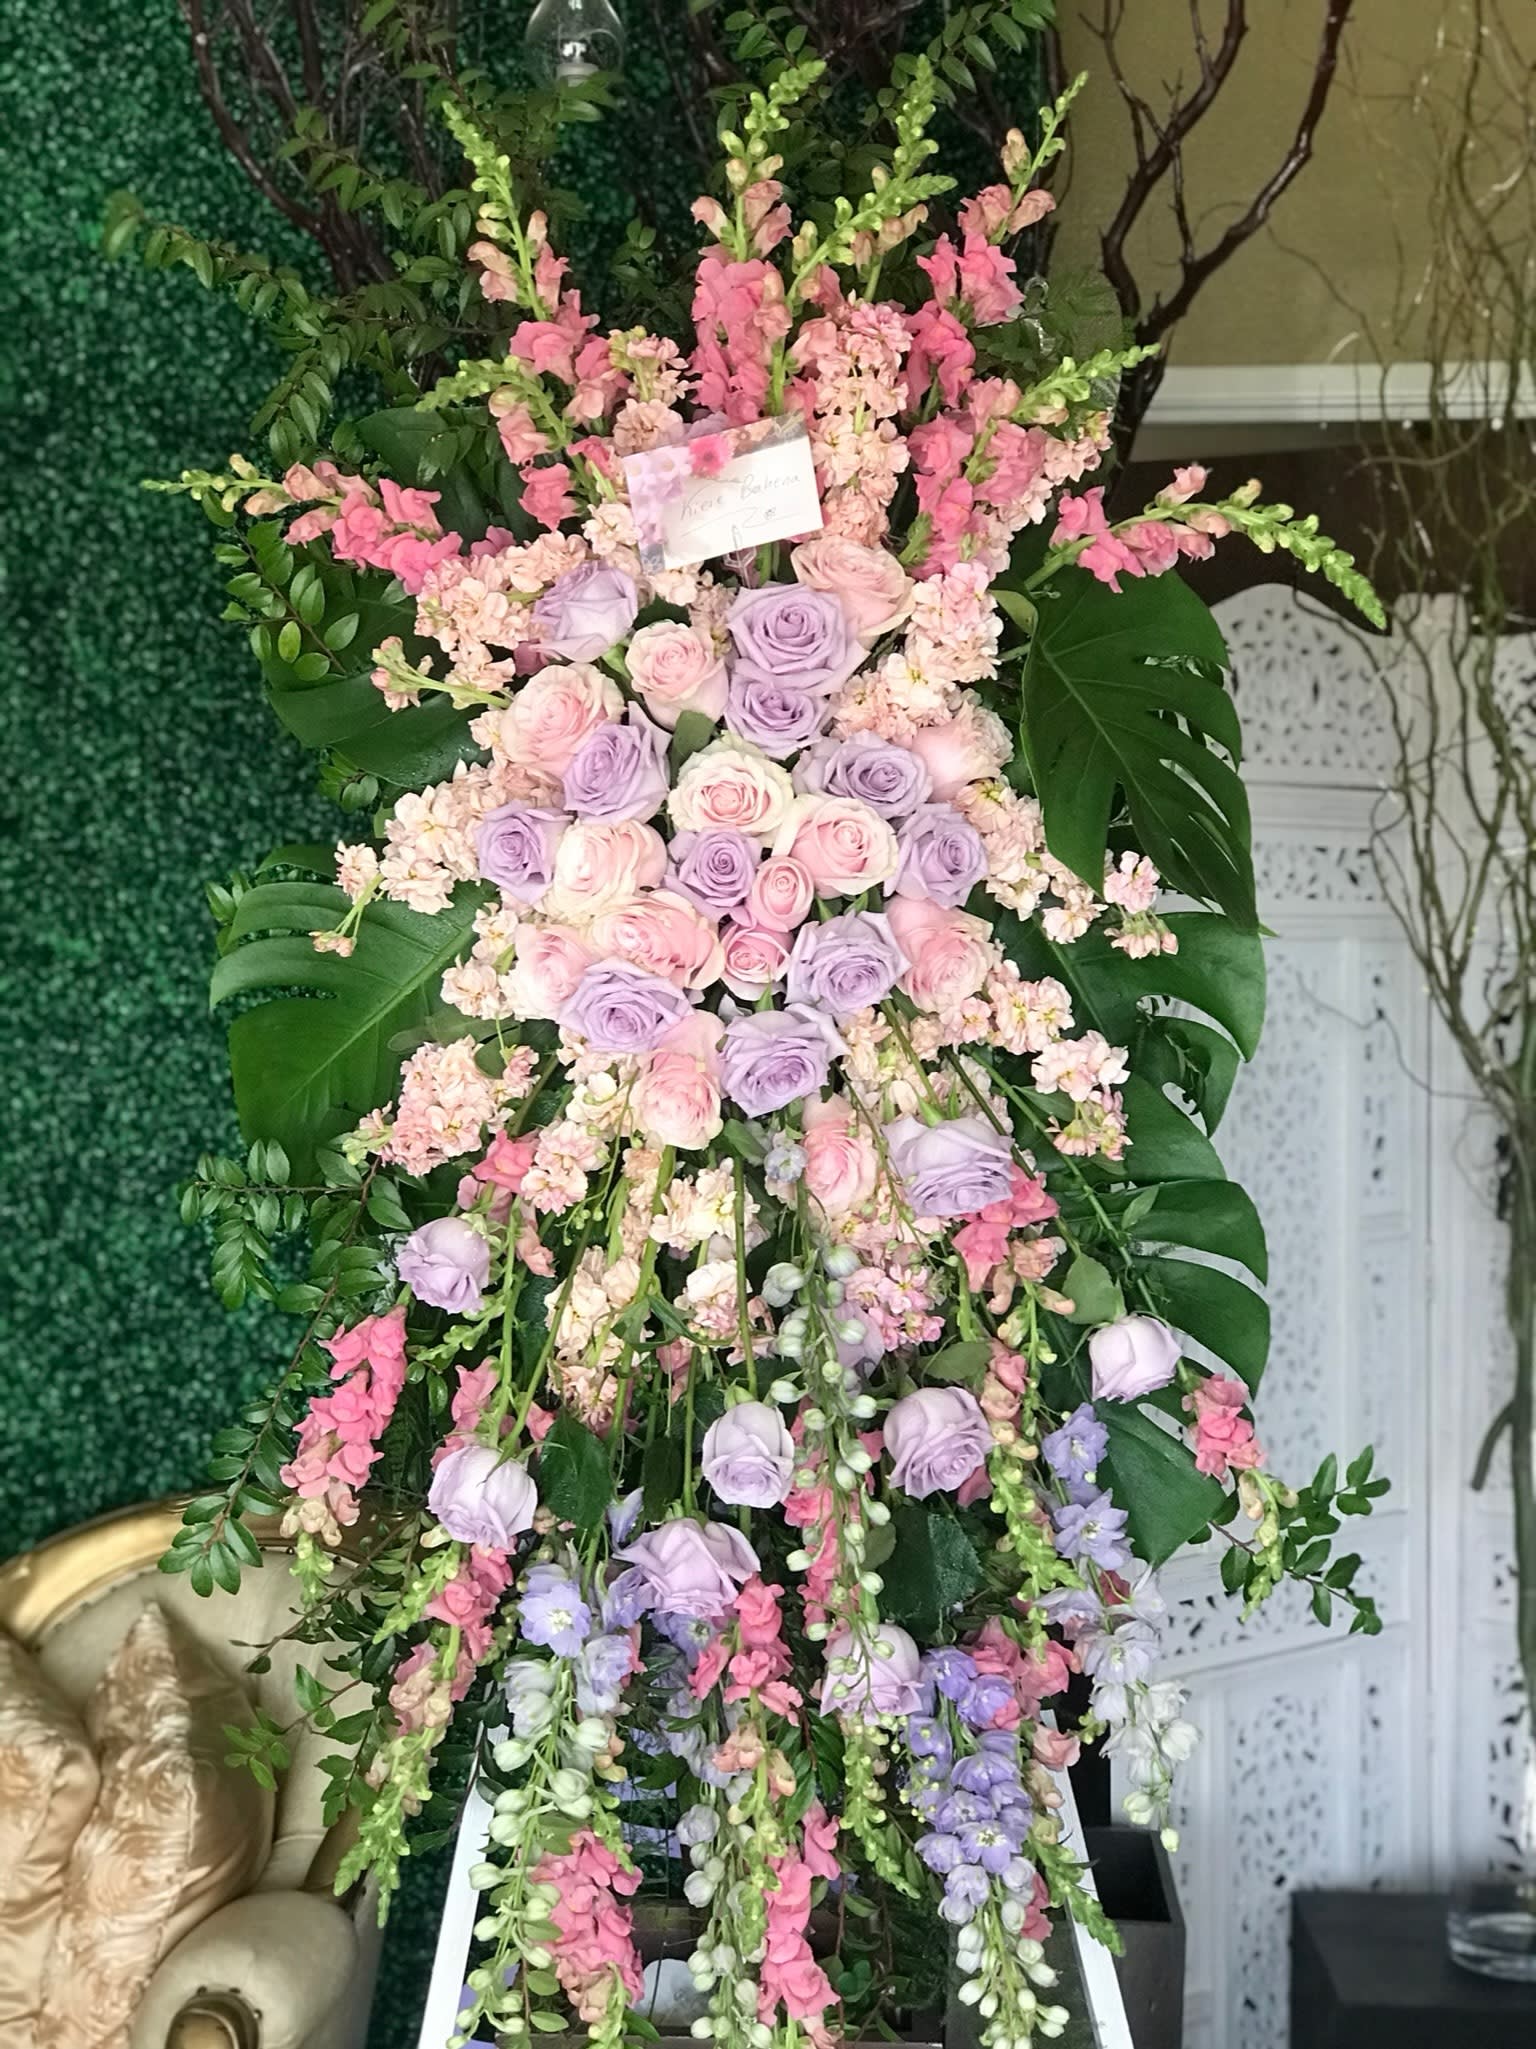 Sympathy 5 - Sympathy and Funeral Floral Piece featuring a mixture of florals in the color scheme desired.   Please call us for all any custom pieces. We have floral specialist available Monday-Friday 9:00am-4:00pm. Email us at henry@tustinflorist.com for any urgent after hours orders or requests.